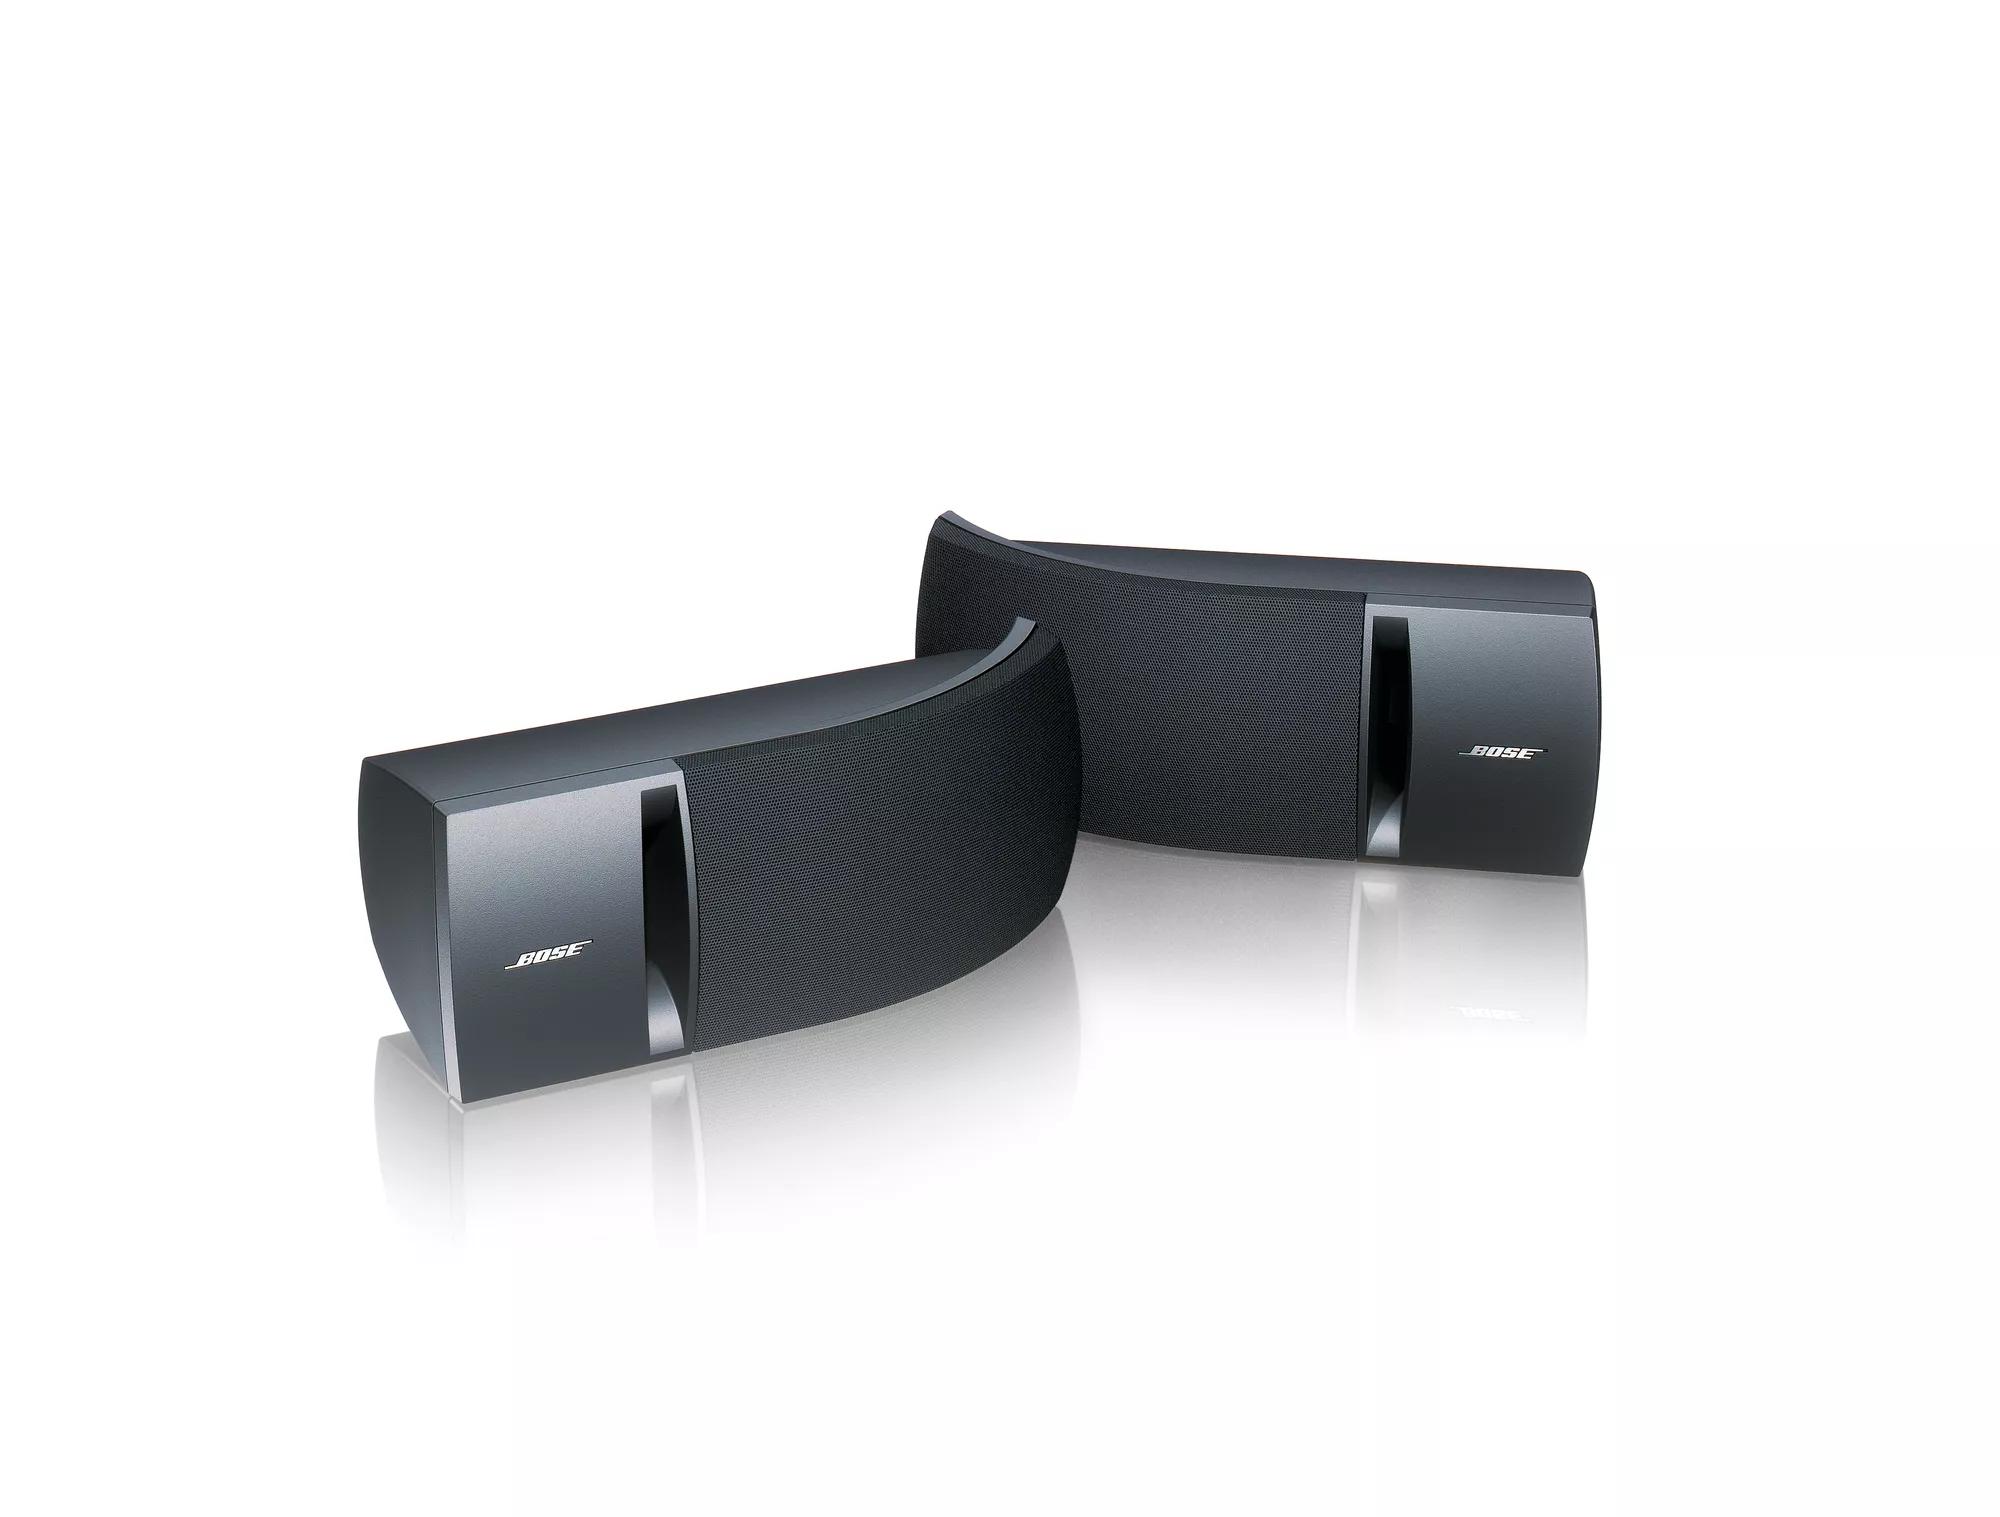 Product Support for Bose Speakers / Stereo